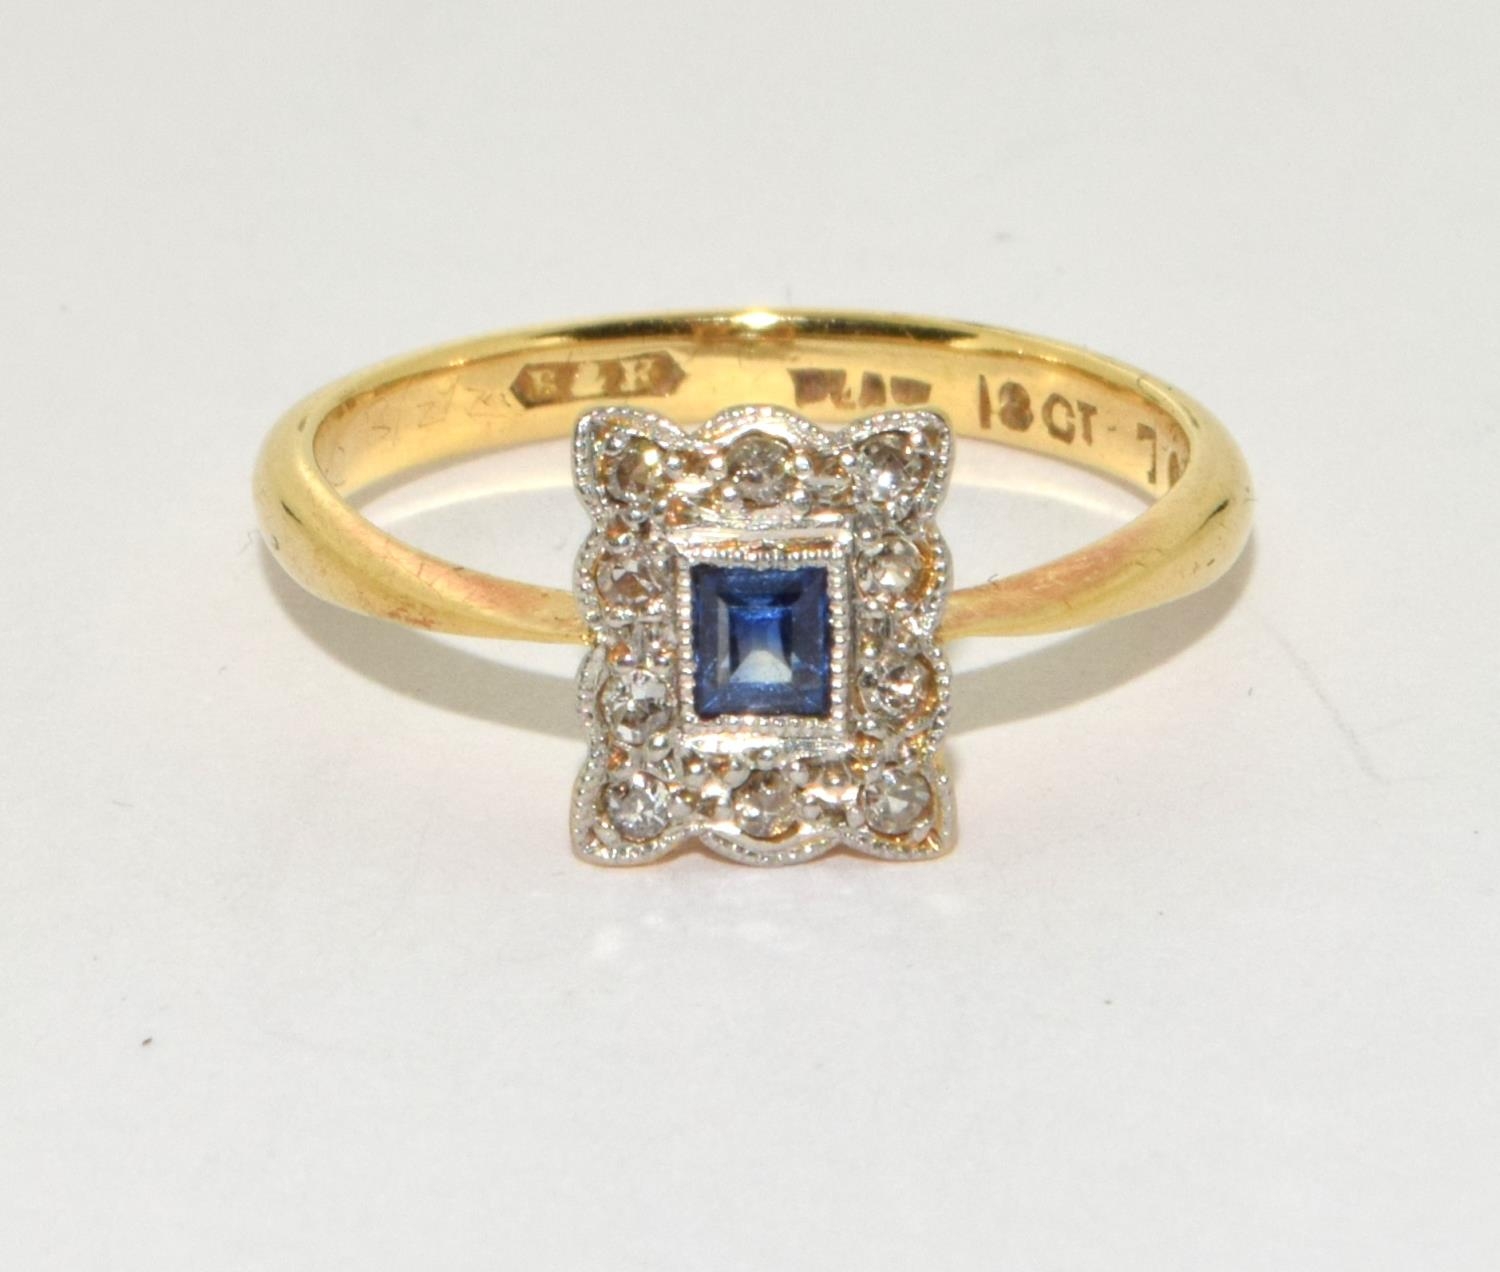 18ct gold Art Deco style ring set with central Sapphire surrounded by Diamonds in a square setting